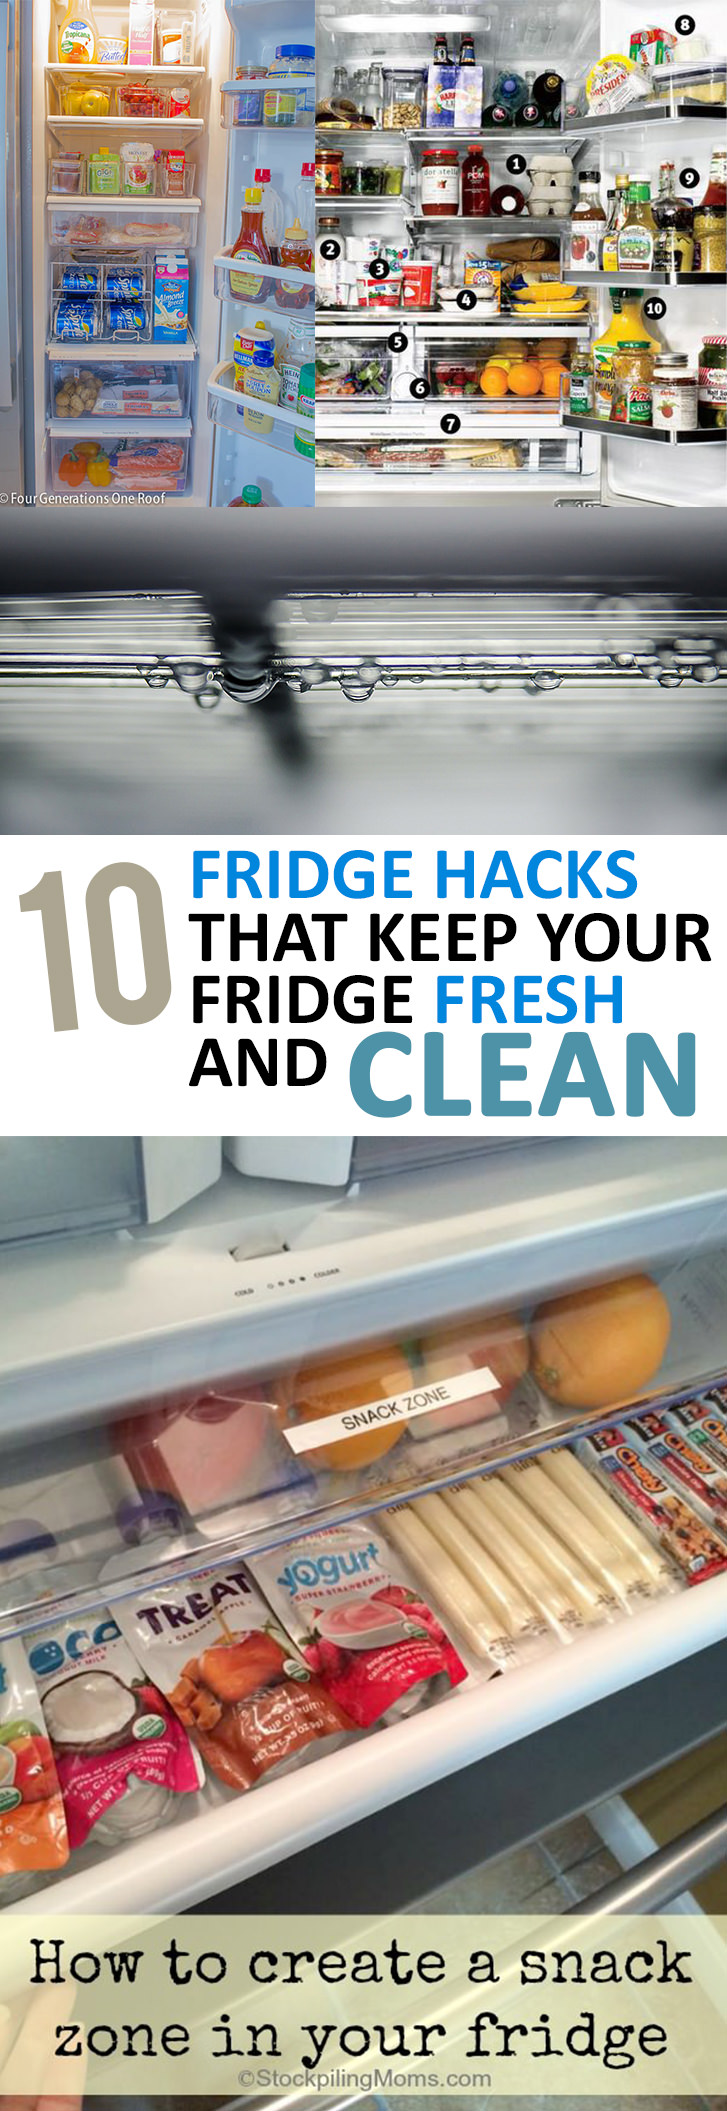 Uncleaned and bad smelling fridge is a common problem, but you can easily solve it. How? Learn these 10 Fridge Hacks and make your refrigerator smelling fresh and clean!